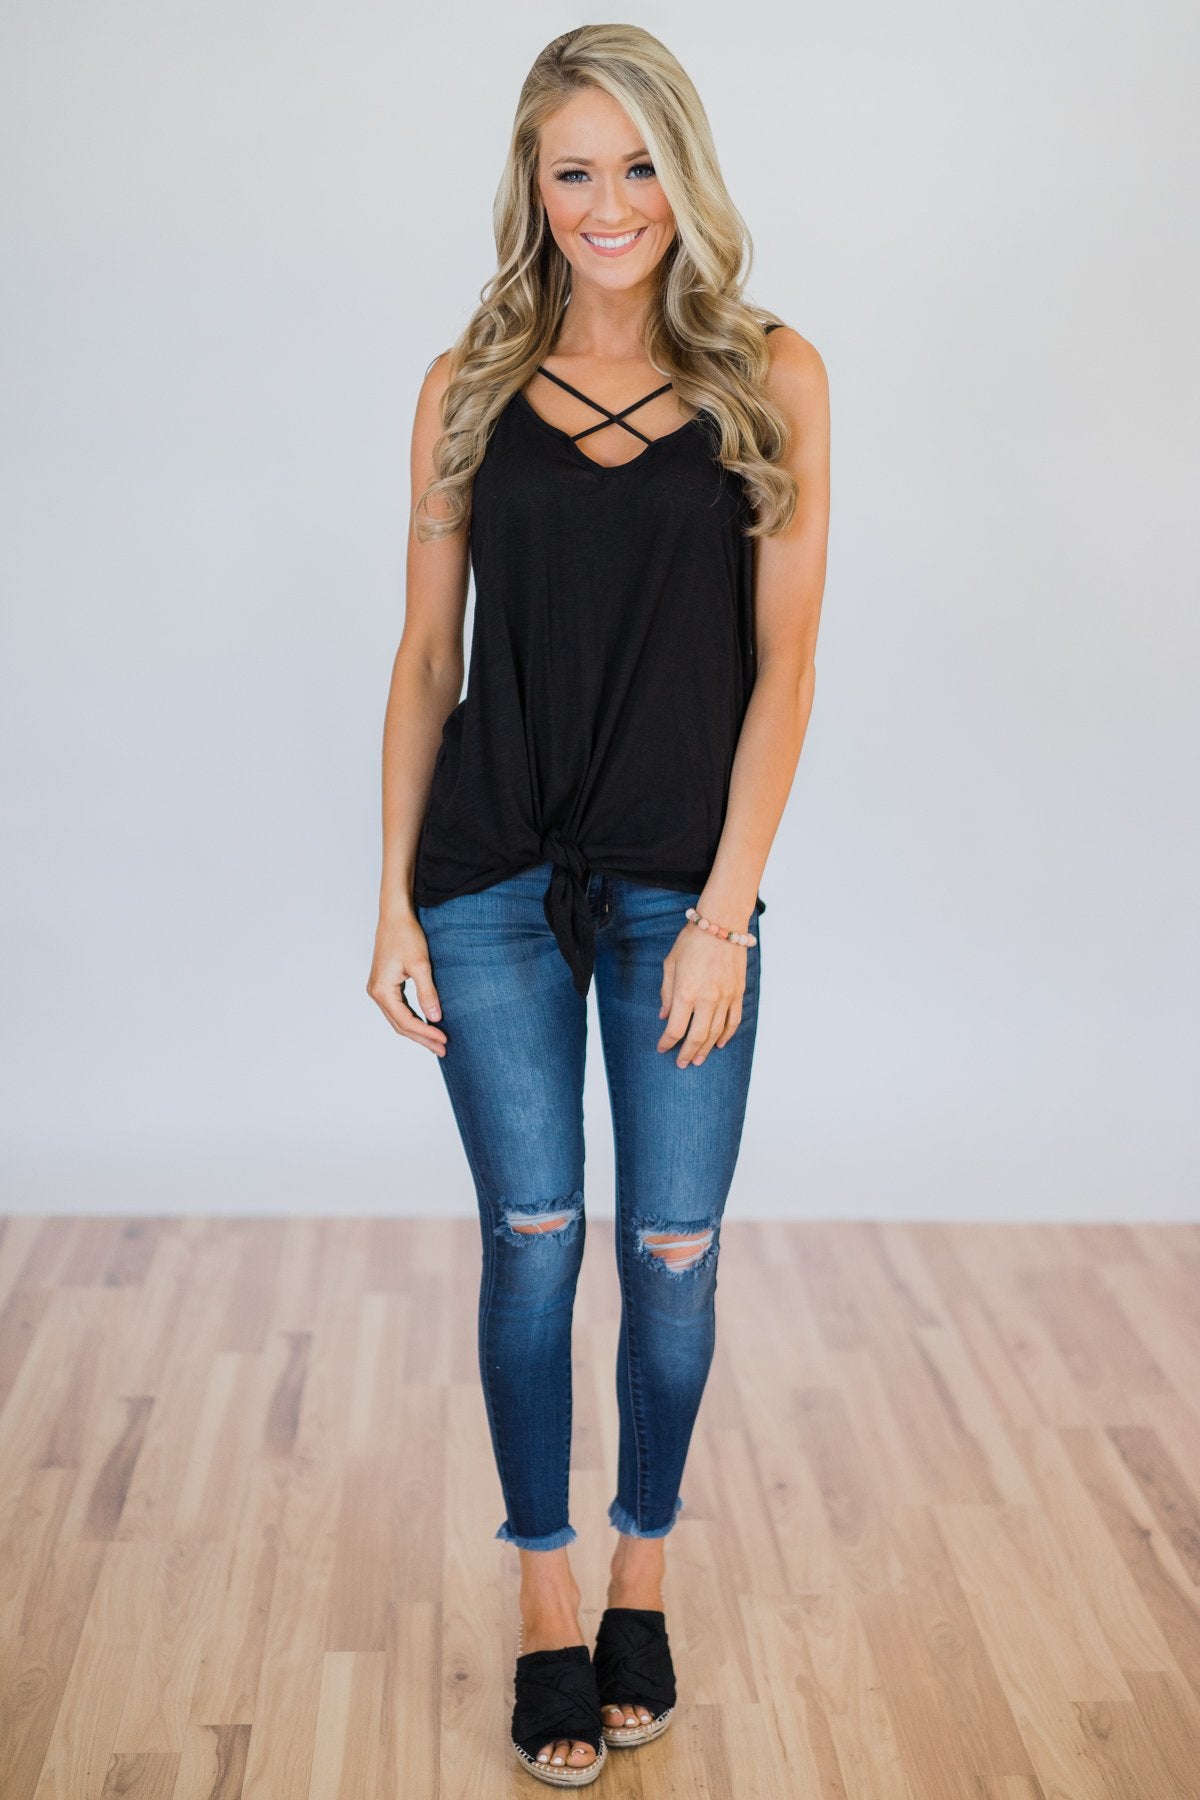 Simply Tied Black Knot Top – The Pulse Boutique